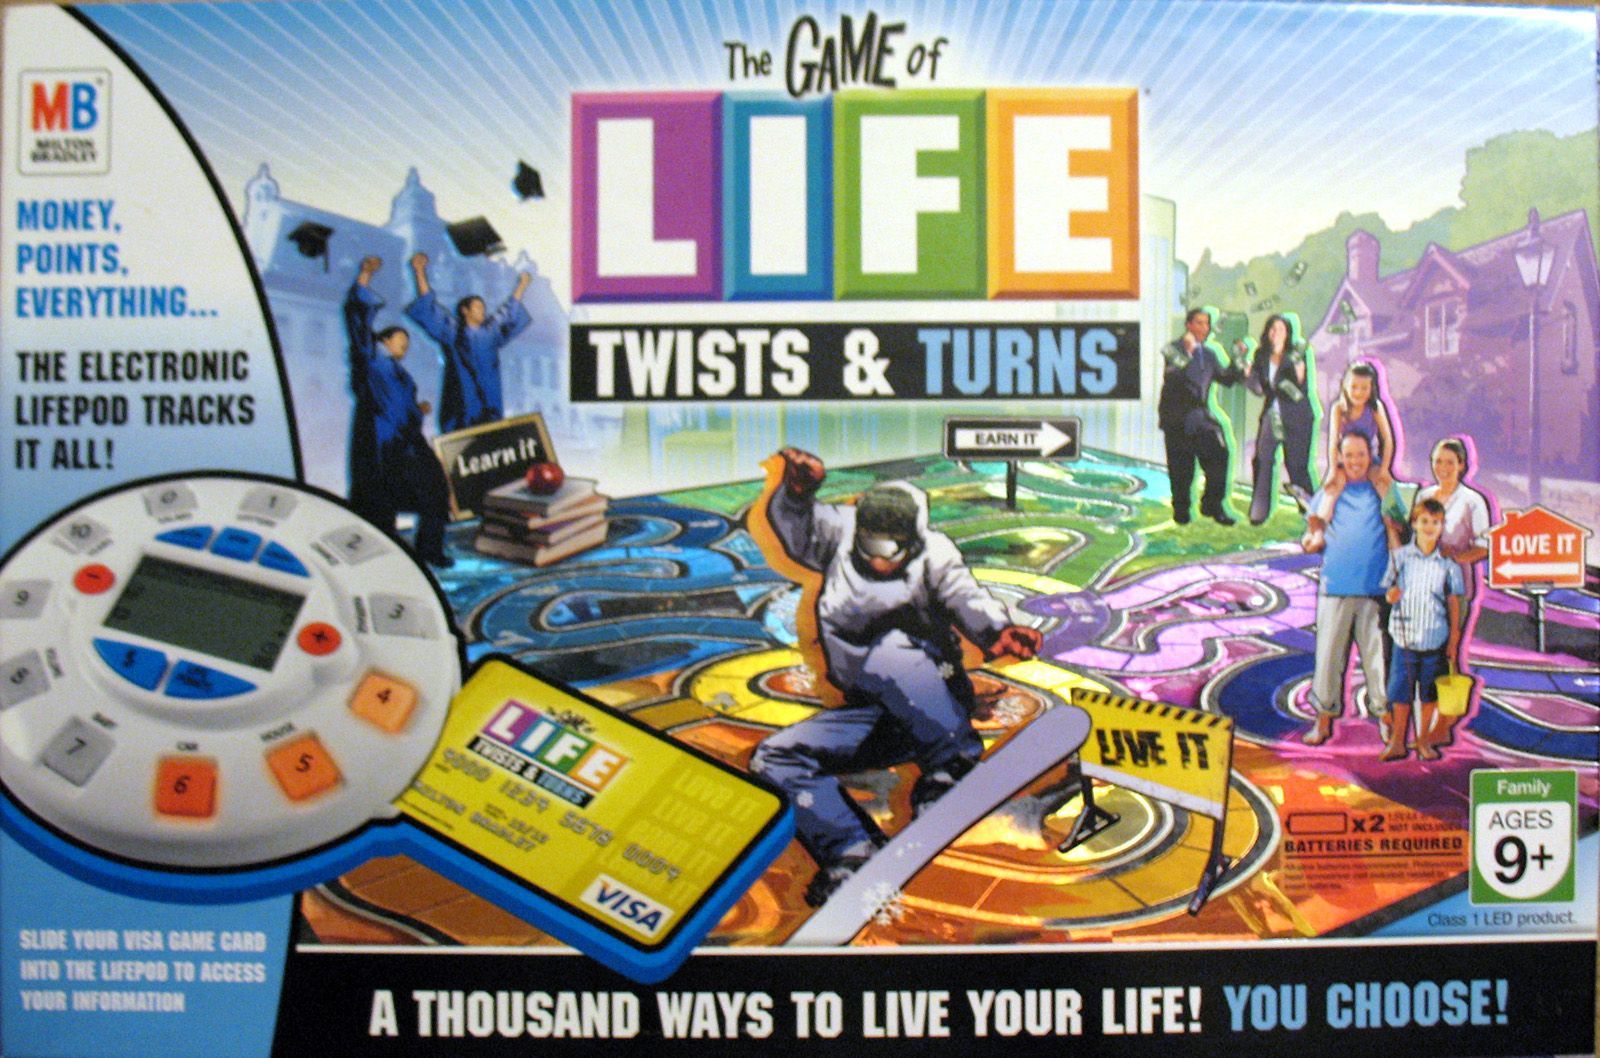 The Game of Life: Twists & Turns